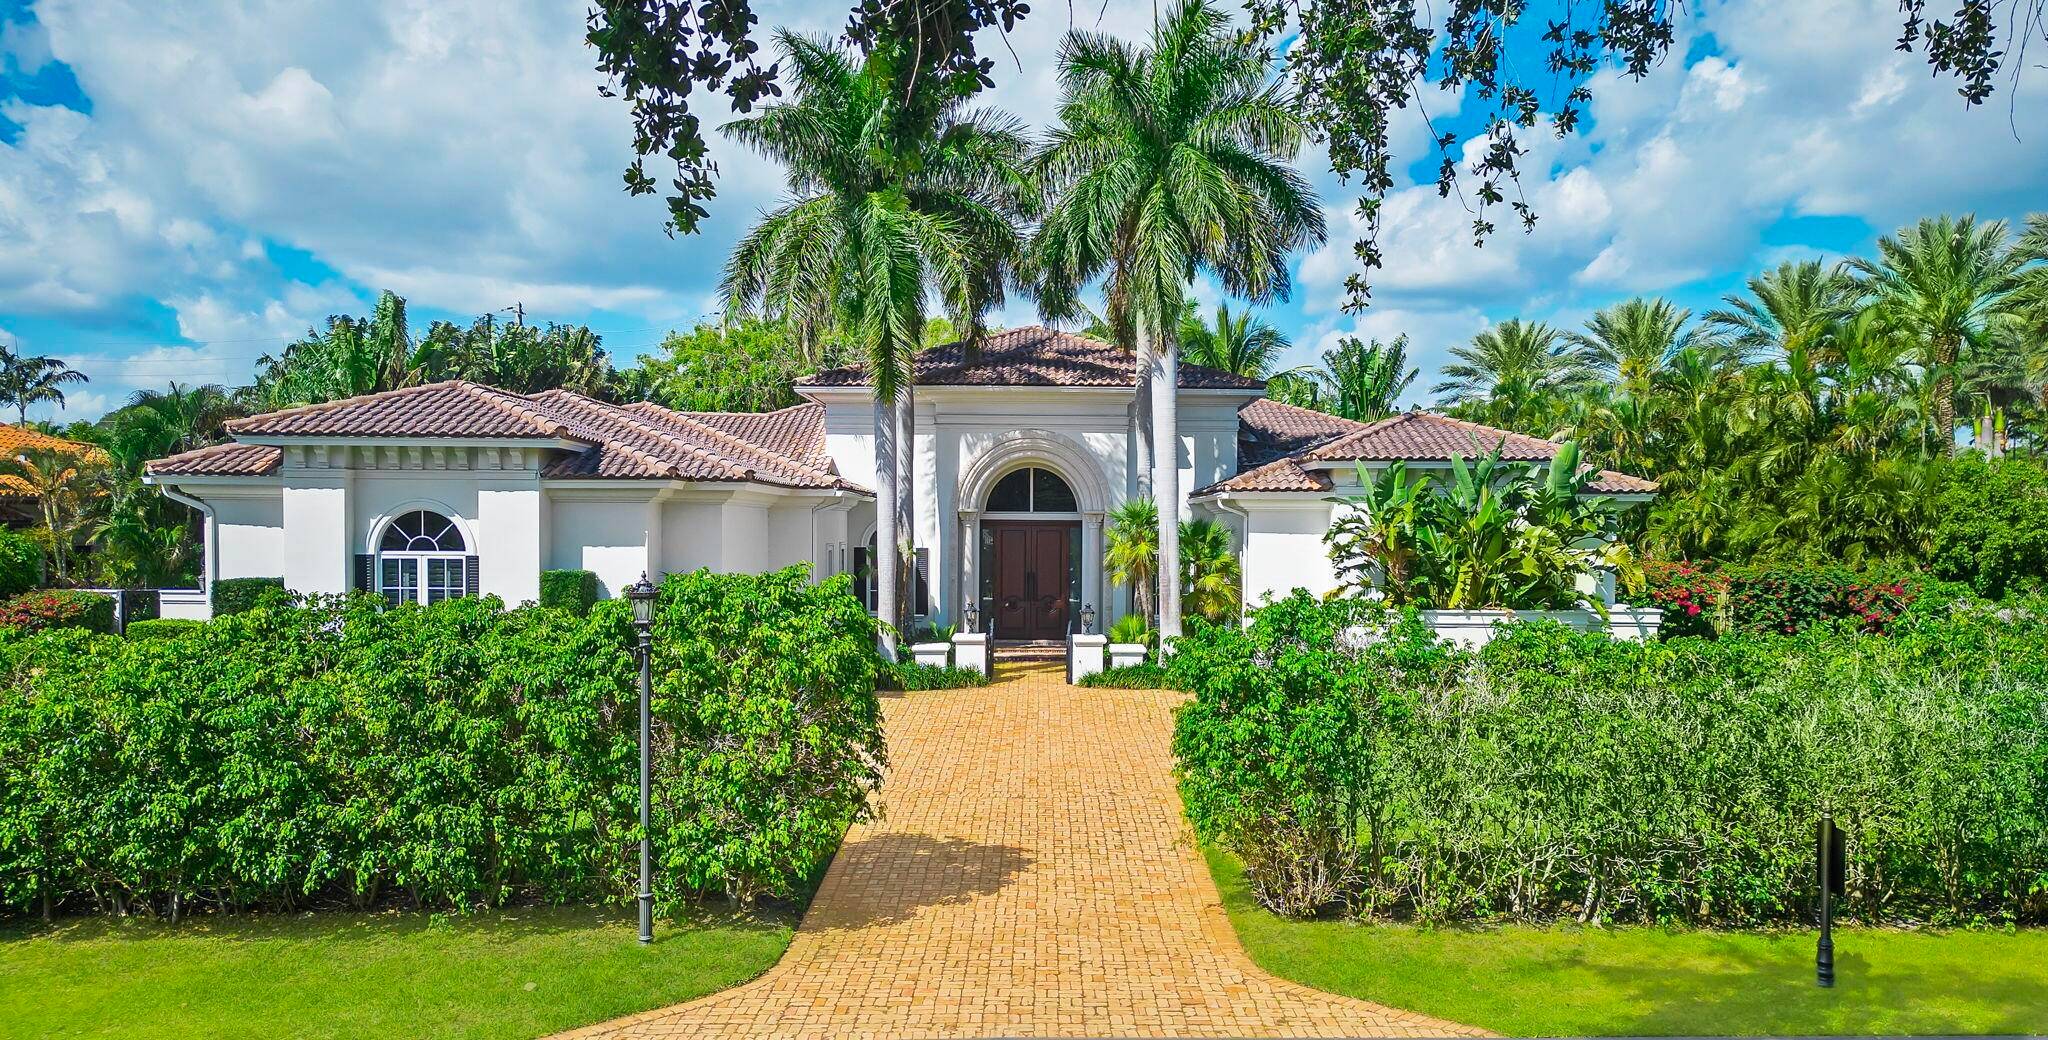 Introducing an extraordinary estate situated in The Sanctuary, one of Boca Raton's most coveted communities.